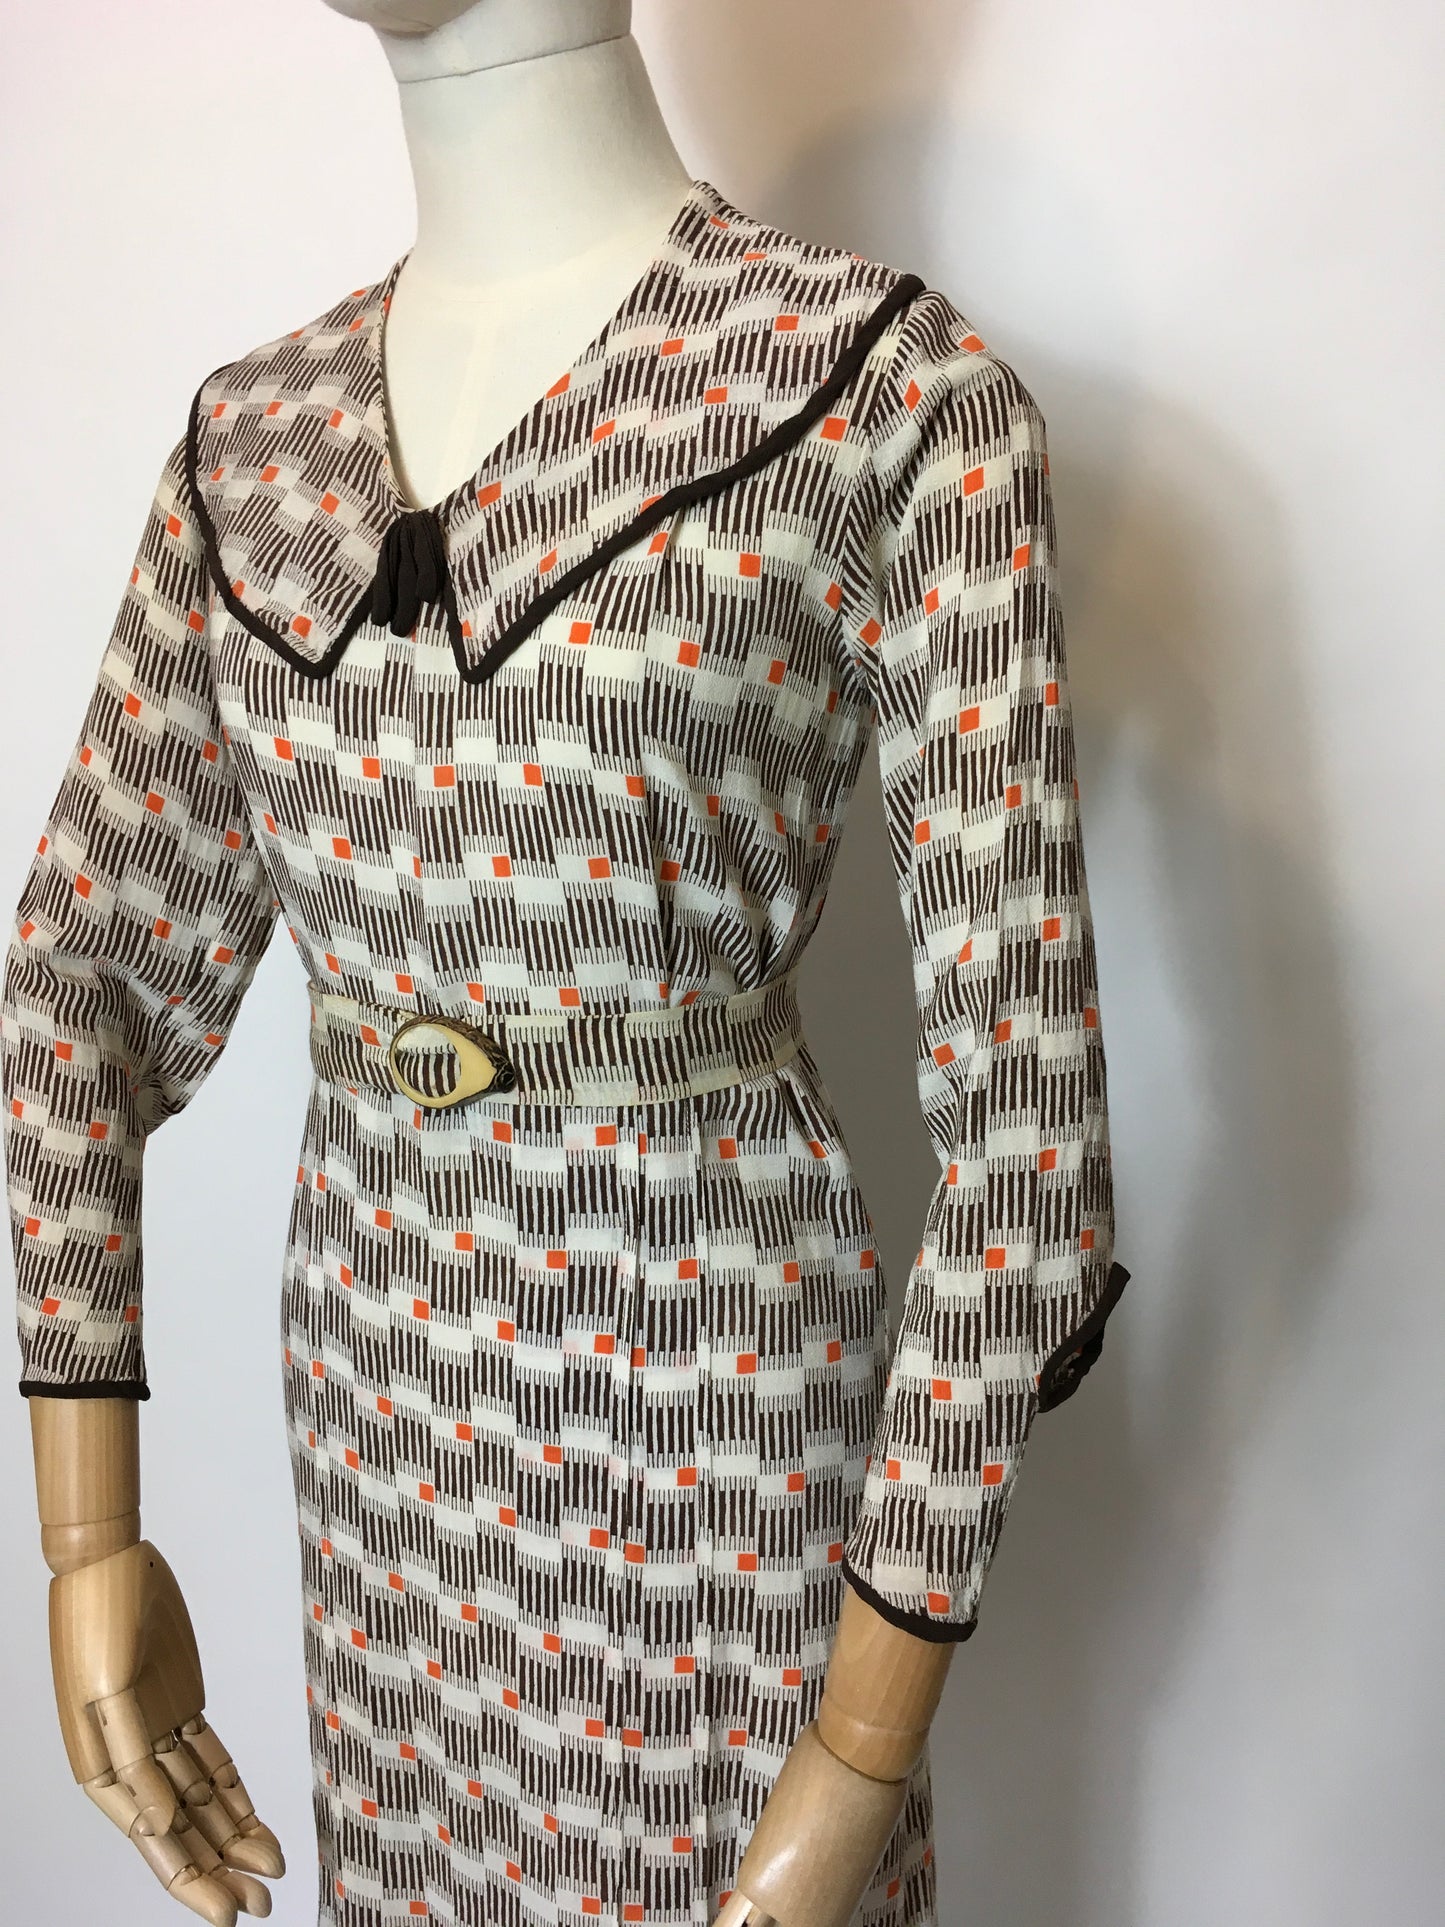 Original 1930’s Day Dress in an Amazing Geometric / Cigarette Print Dress in Browns, old Creams and deco Oranges - Festival Of Vintage Fashion Show Exclusive